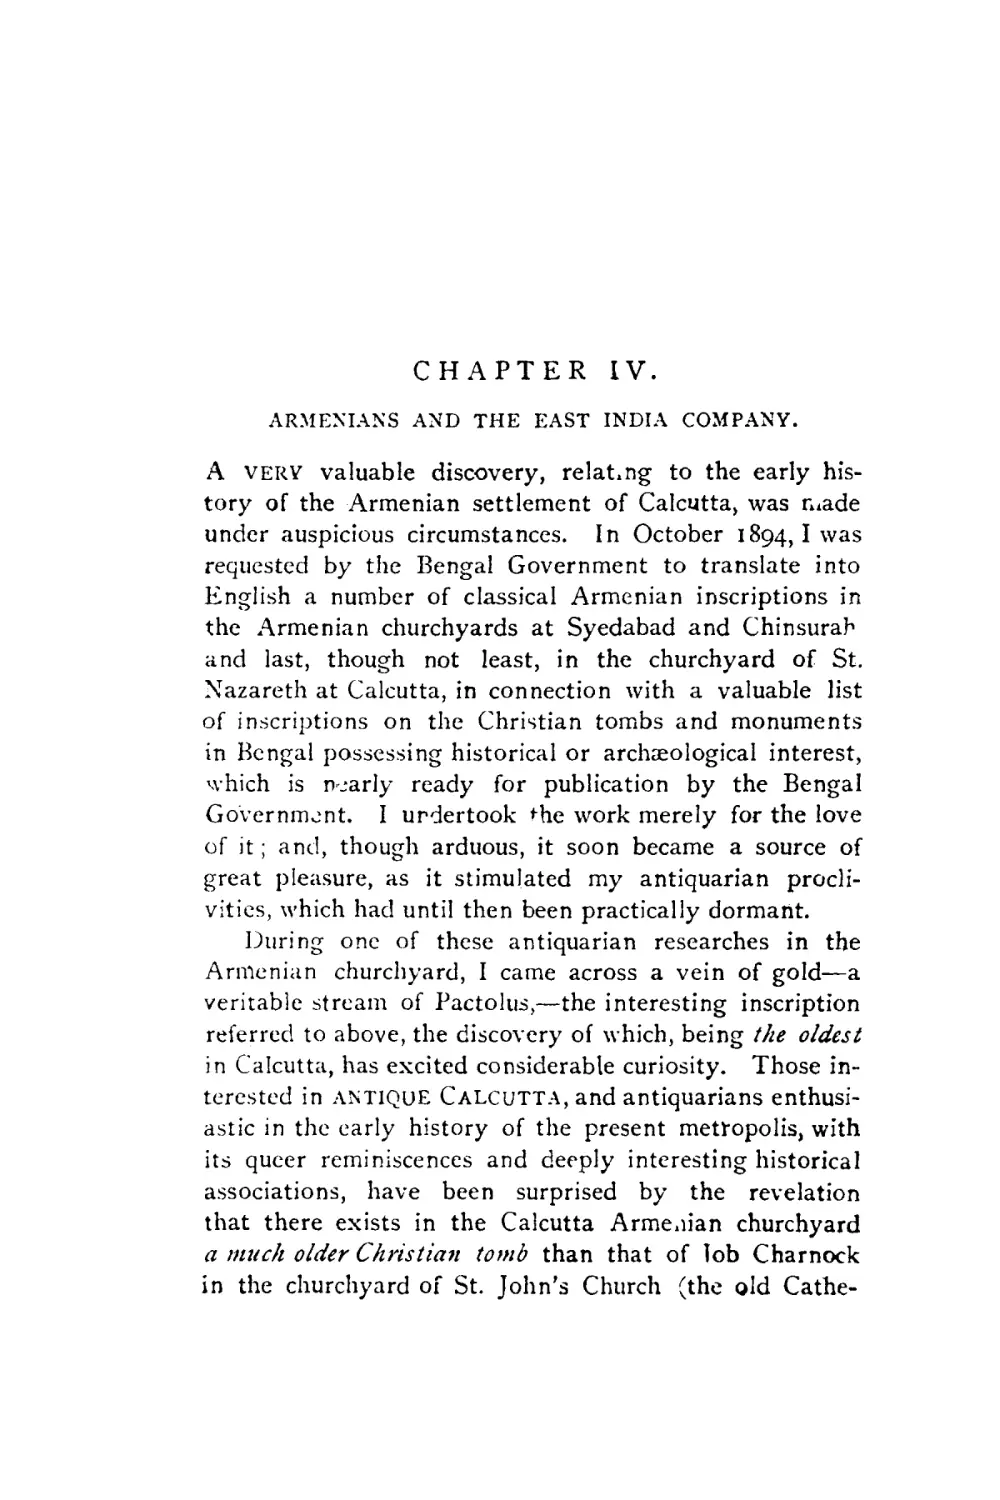 CHAPTER IV. ARMENIANS AND THE EAST INDIA COMPANY